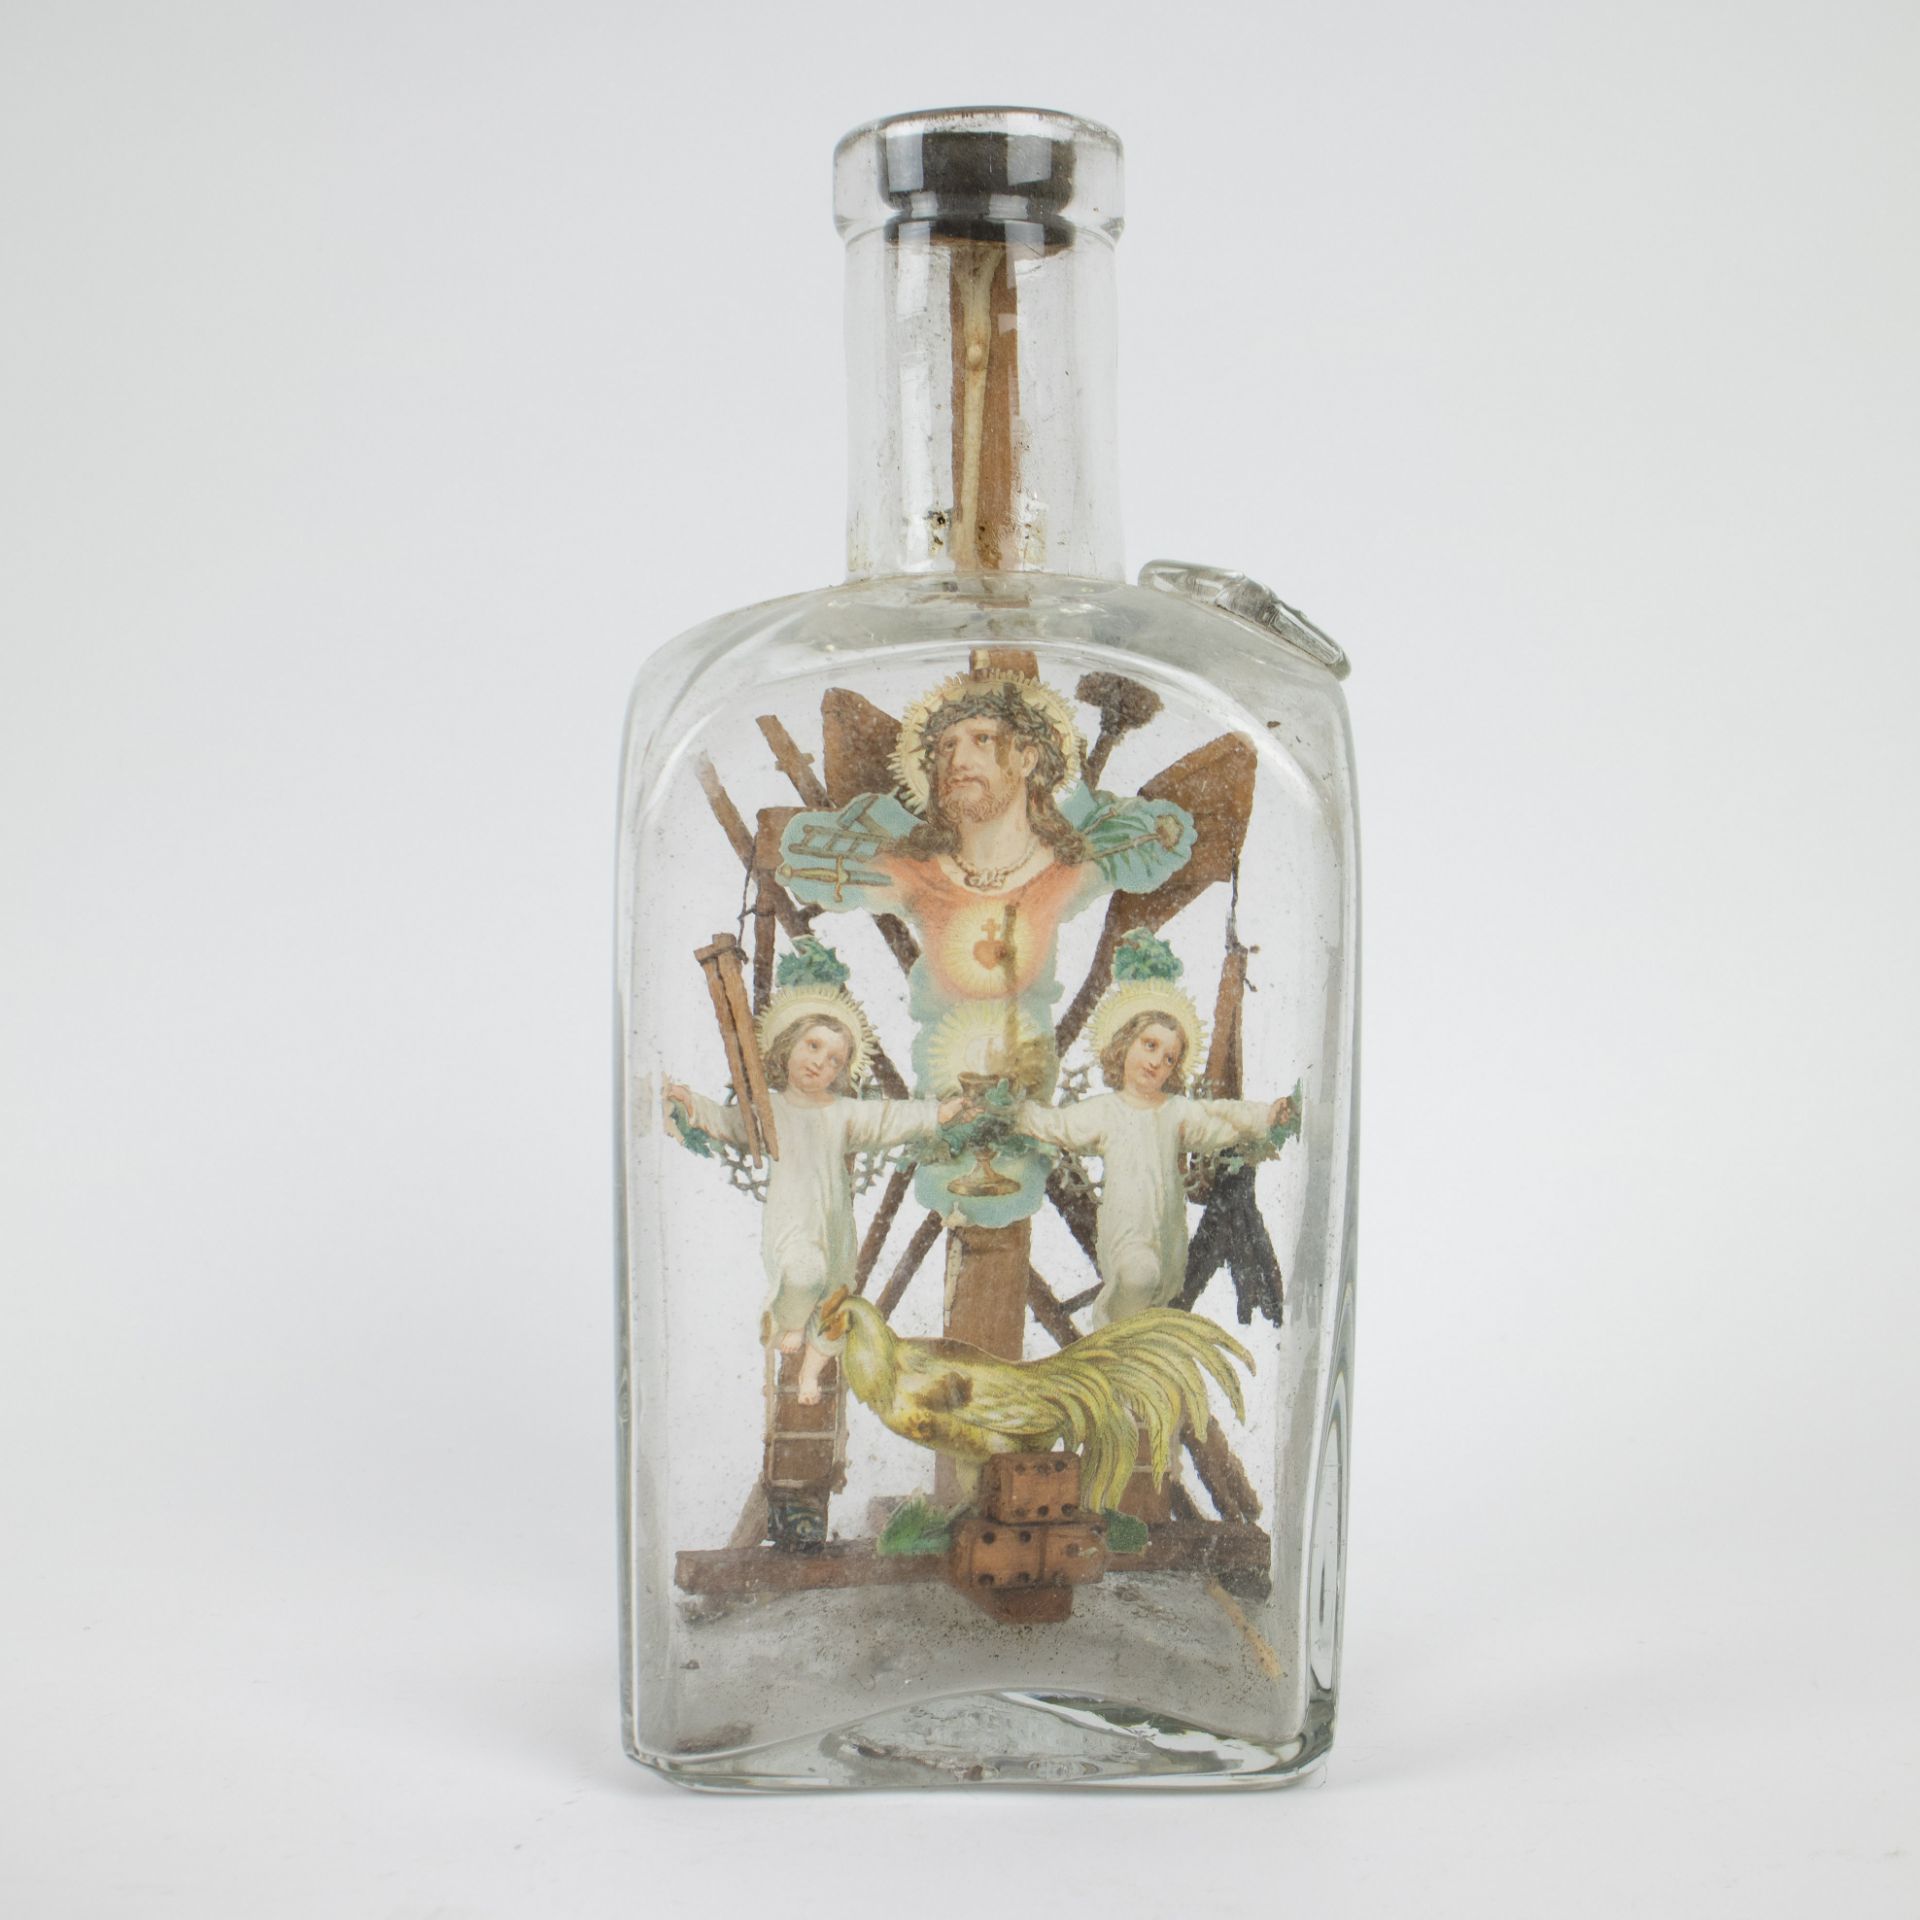 A collection of religious items consisting of a relic, a relic beguine Theressia Verhaeghe, a bottle - Bild 2 aus 8